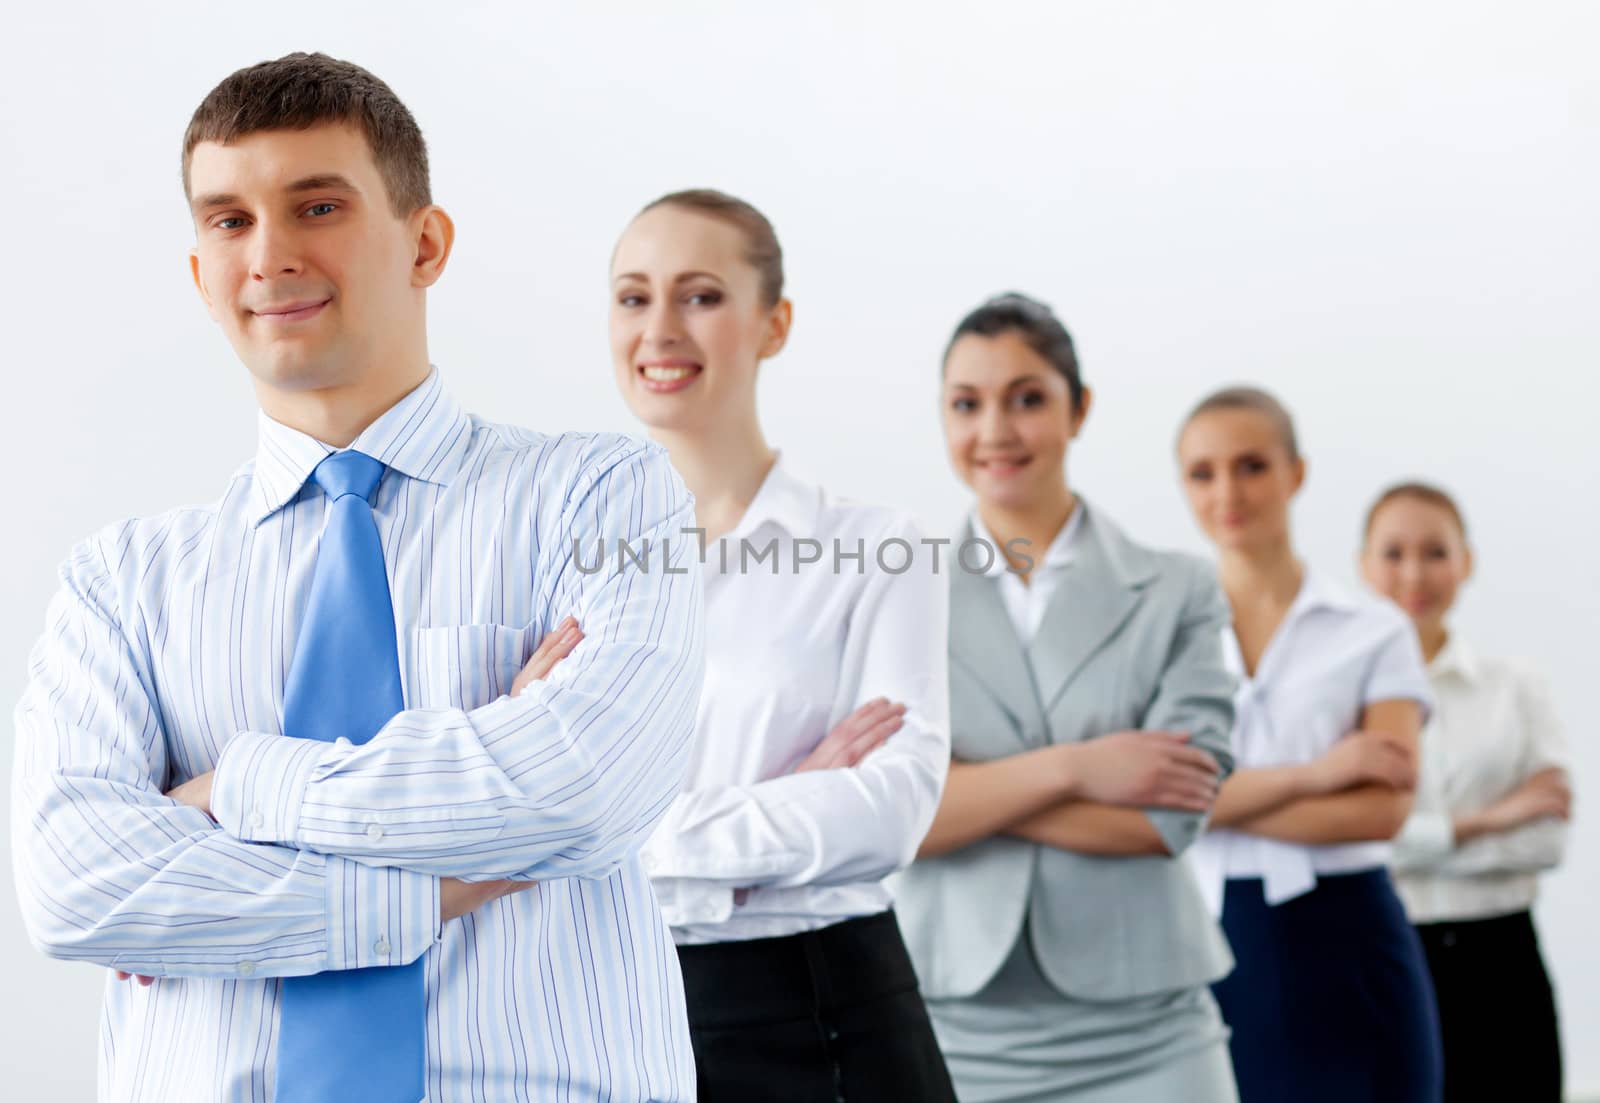 Group of businesspeople smiling standing with arms crossed